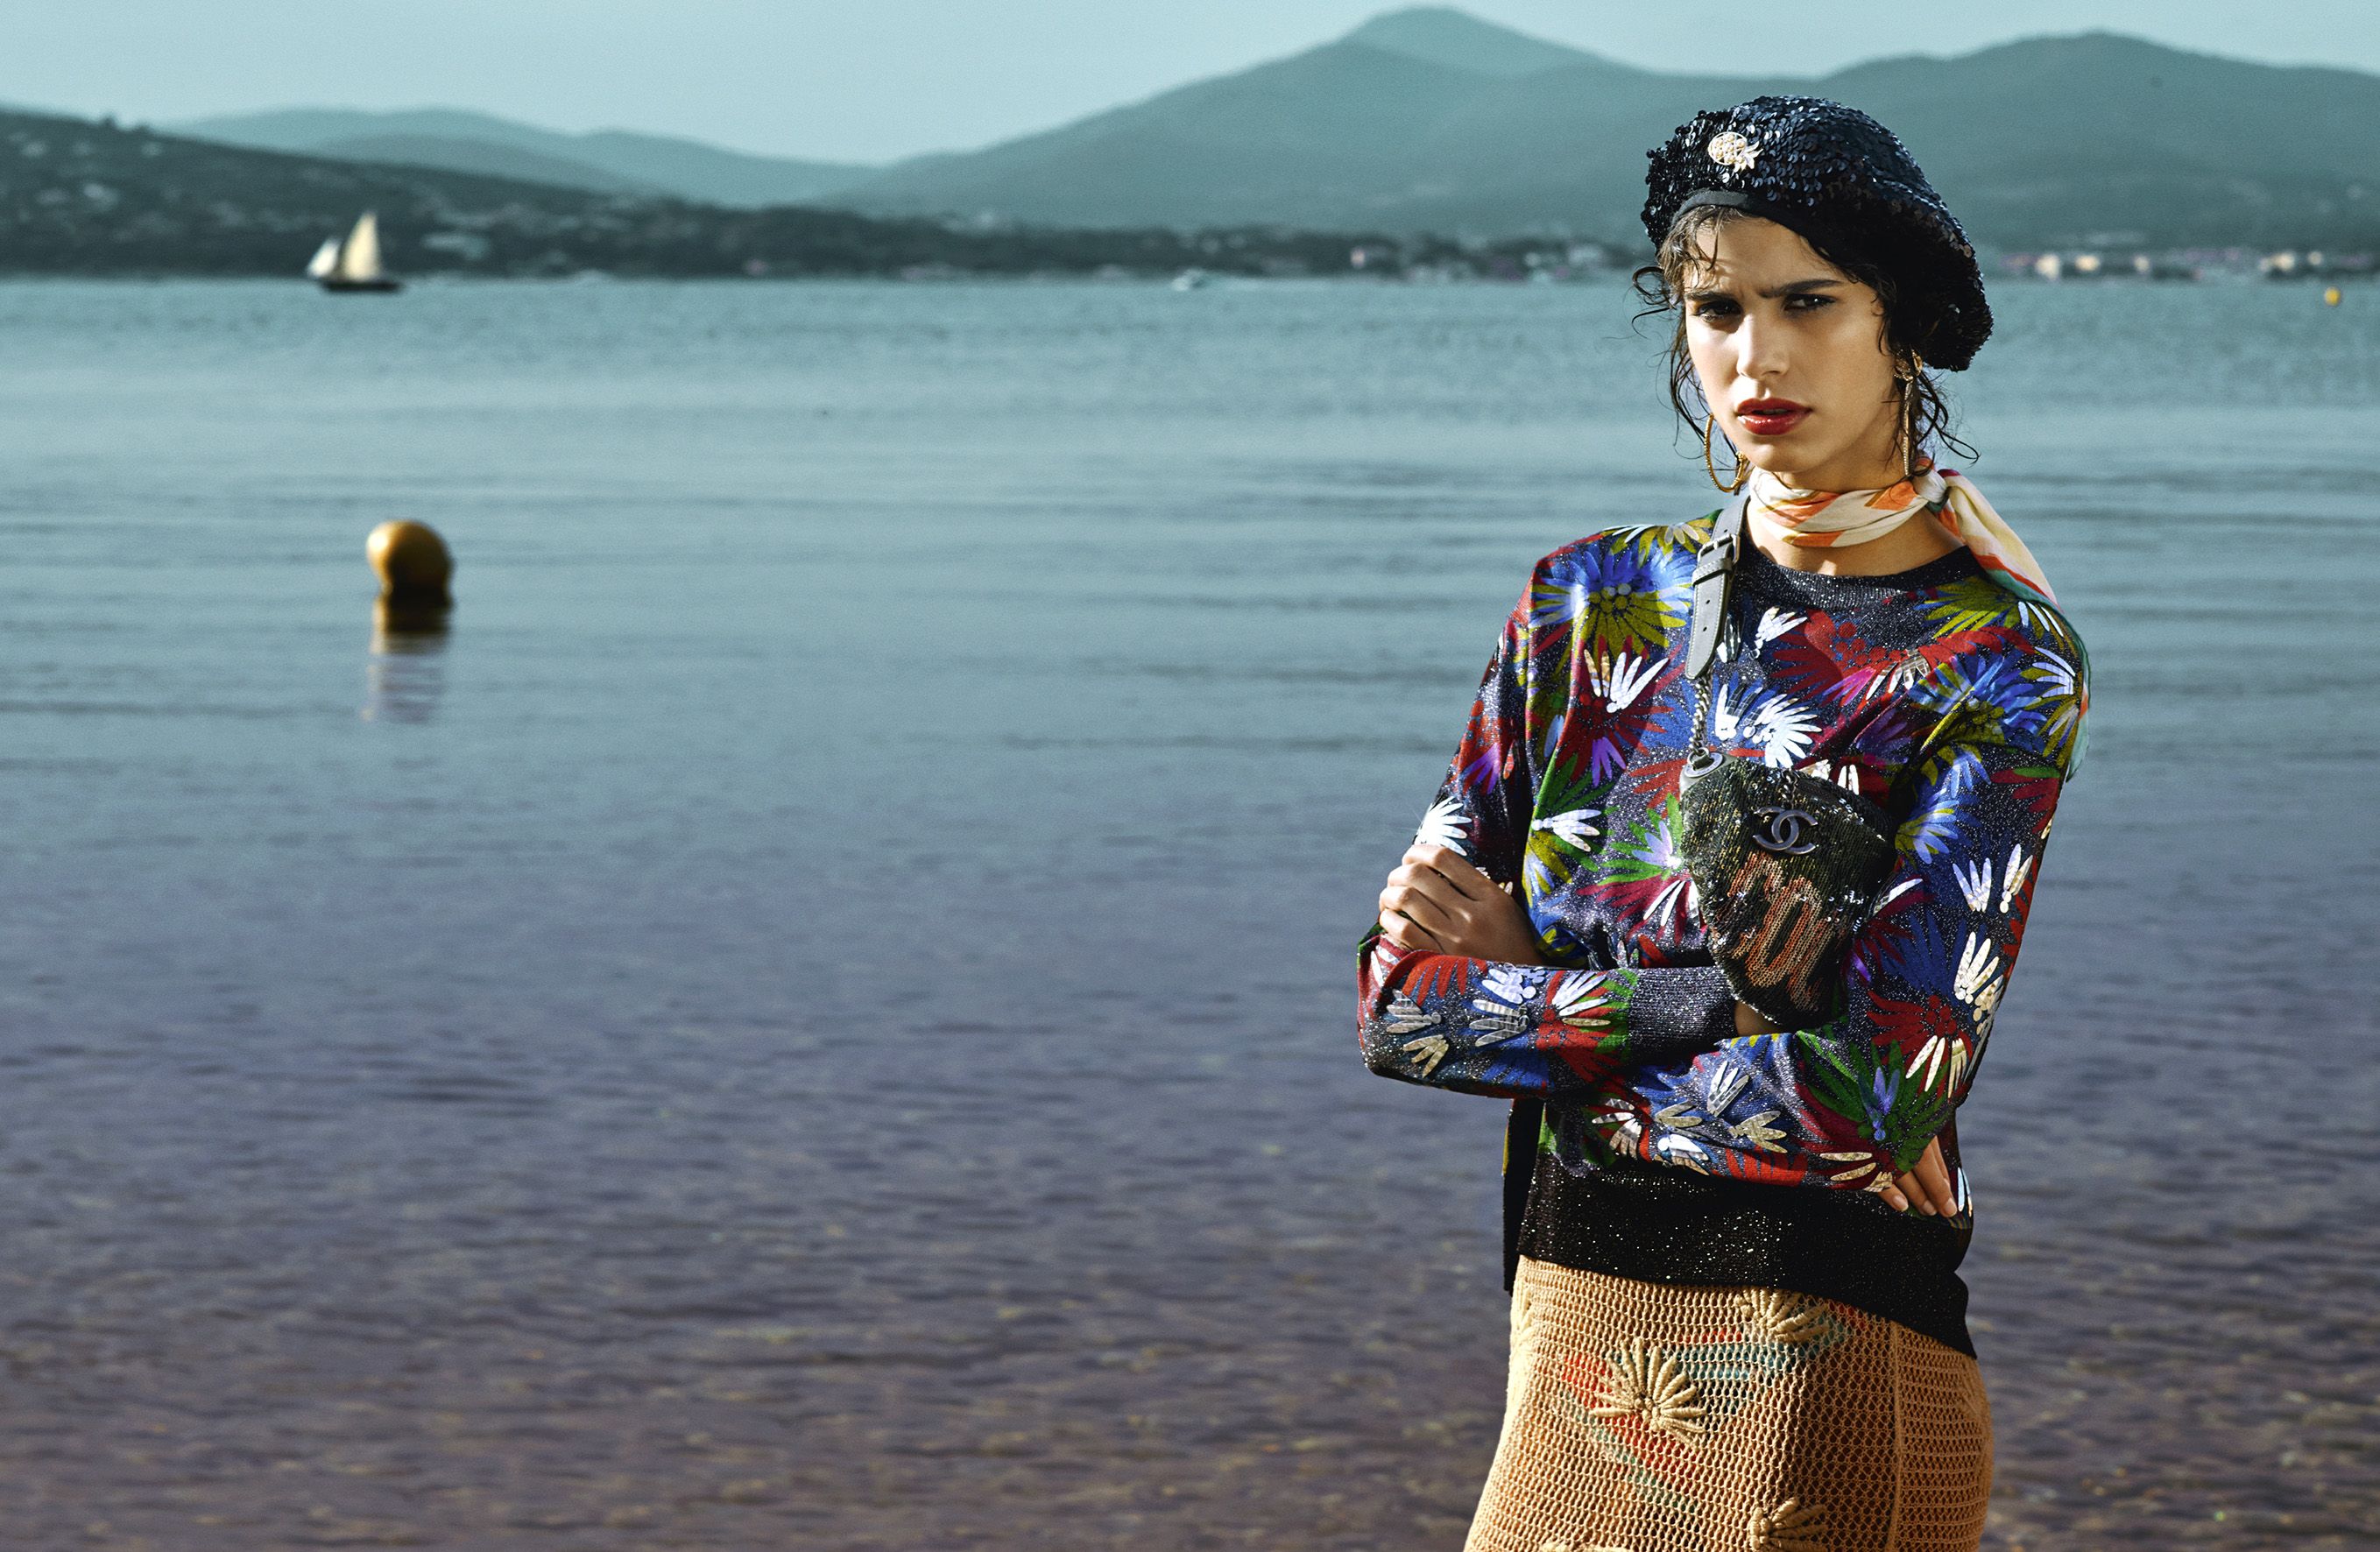 The Chanel Cruise Campaign Has So Many Styling Ideas